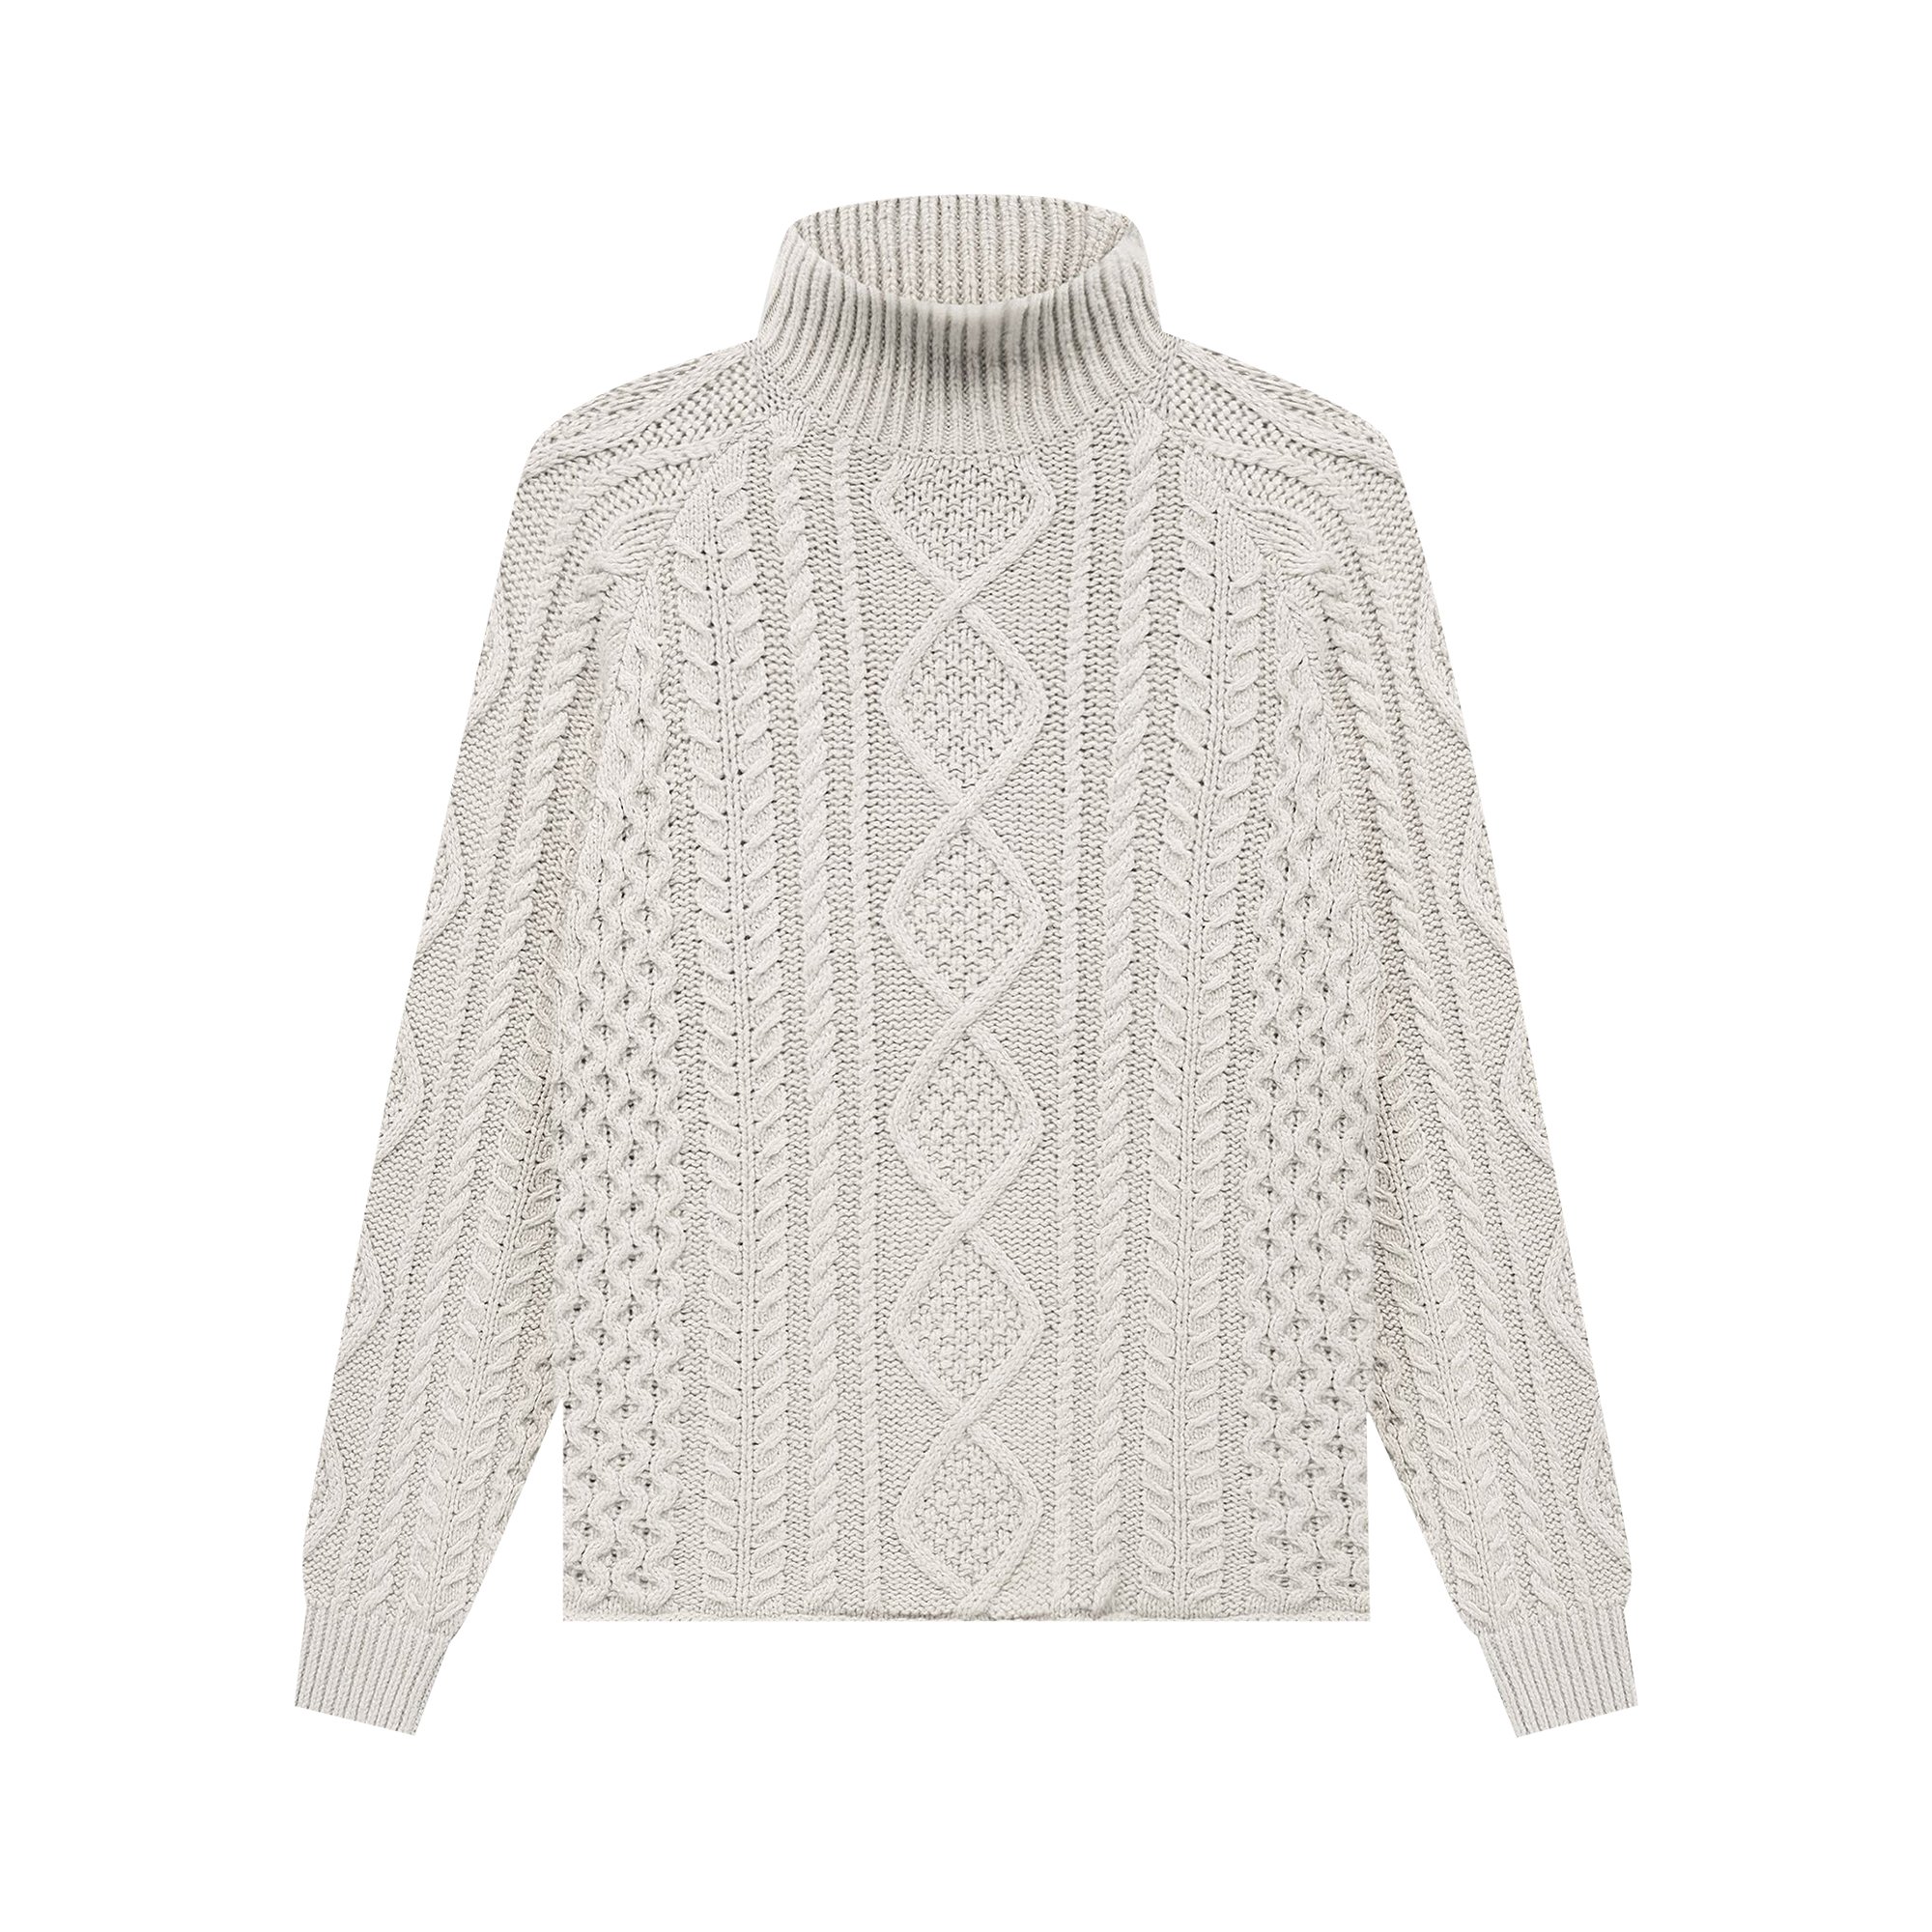 Fear of God Essentials Cable Knit Turtleneck 'Wheat'